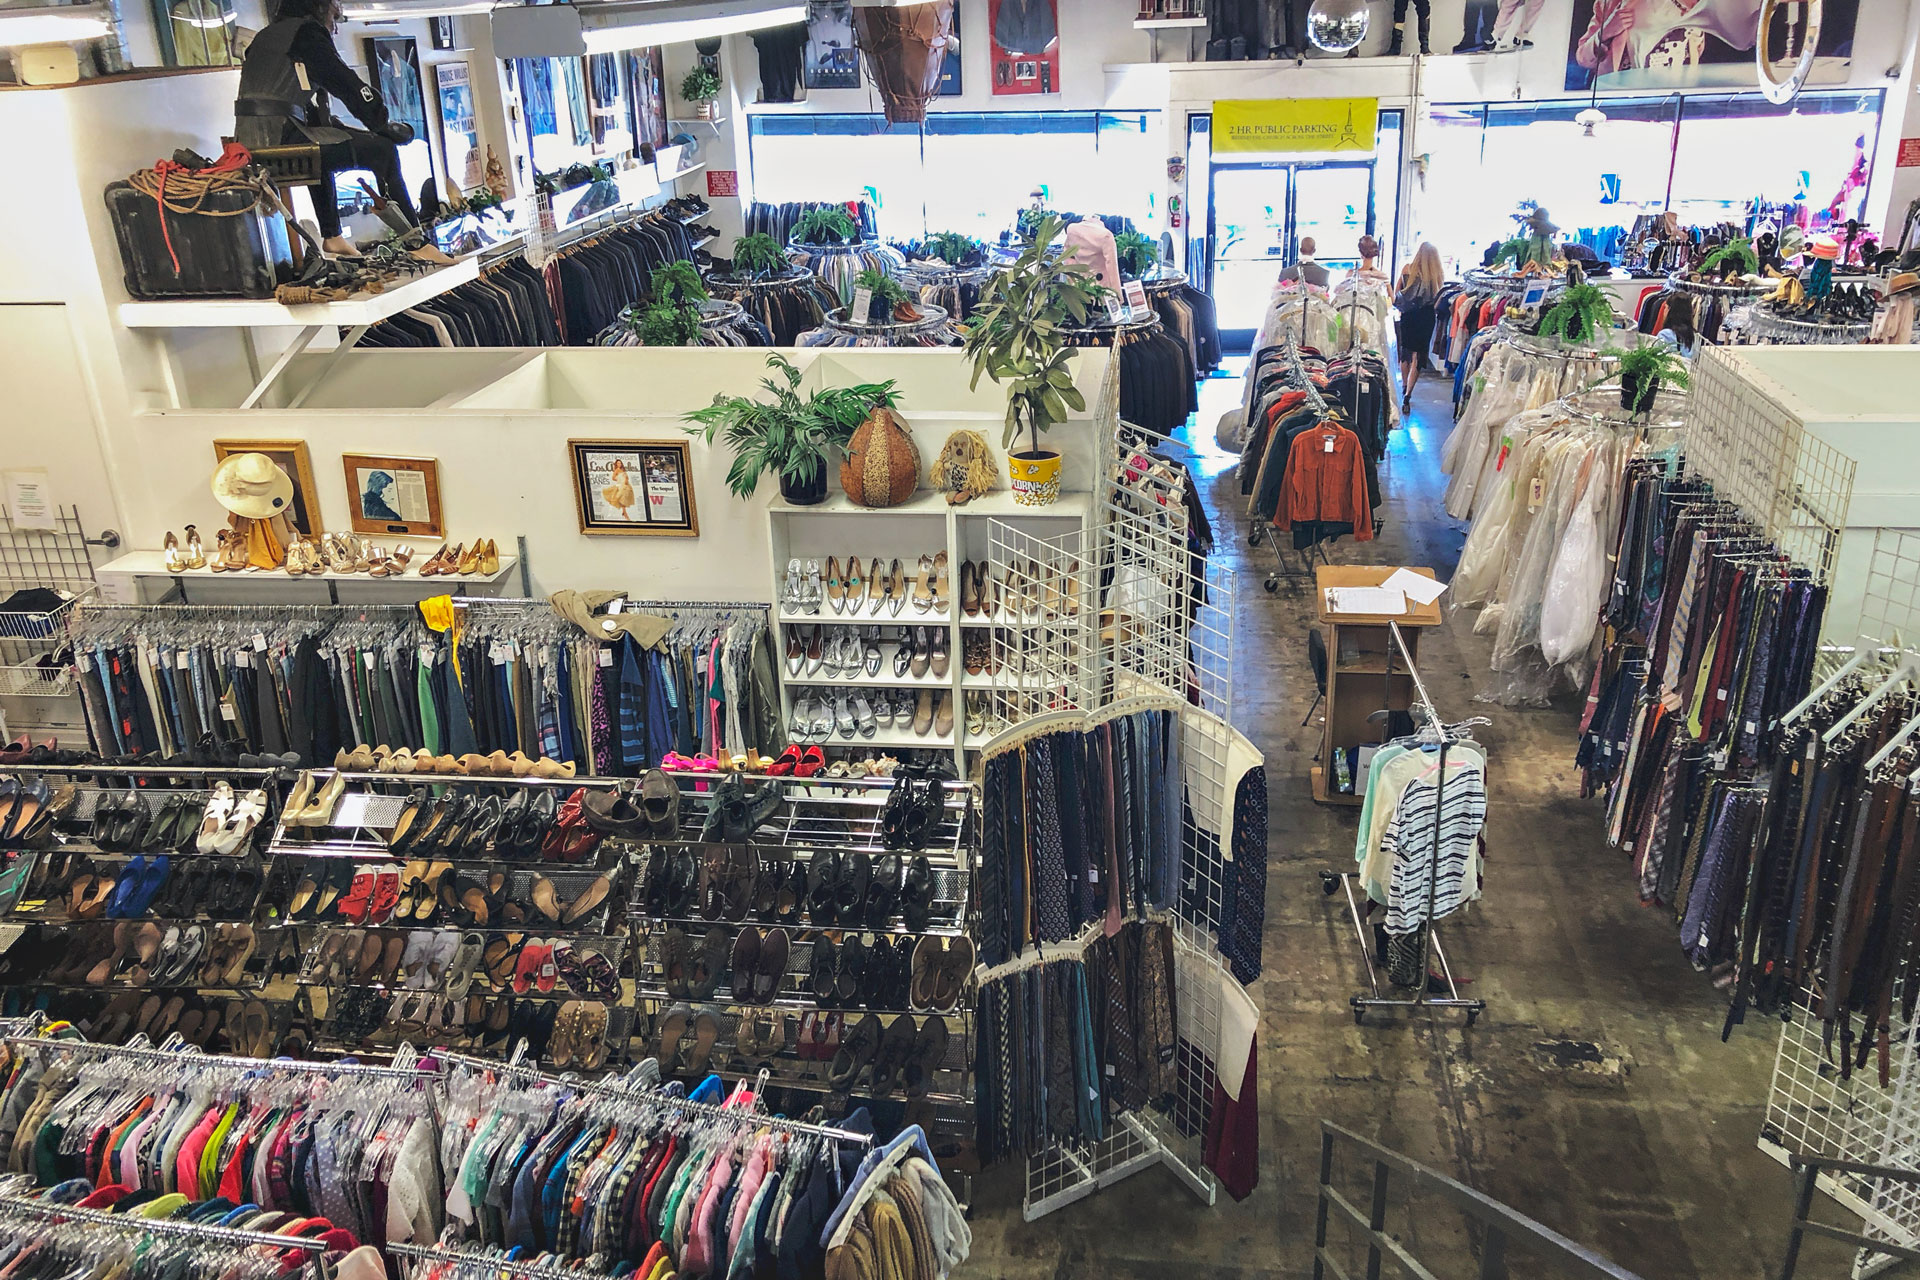 secondhand shopping, thrifting, local thrift shops, burbank thrift shops, it's a wrap